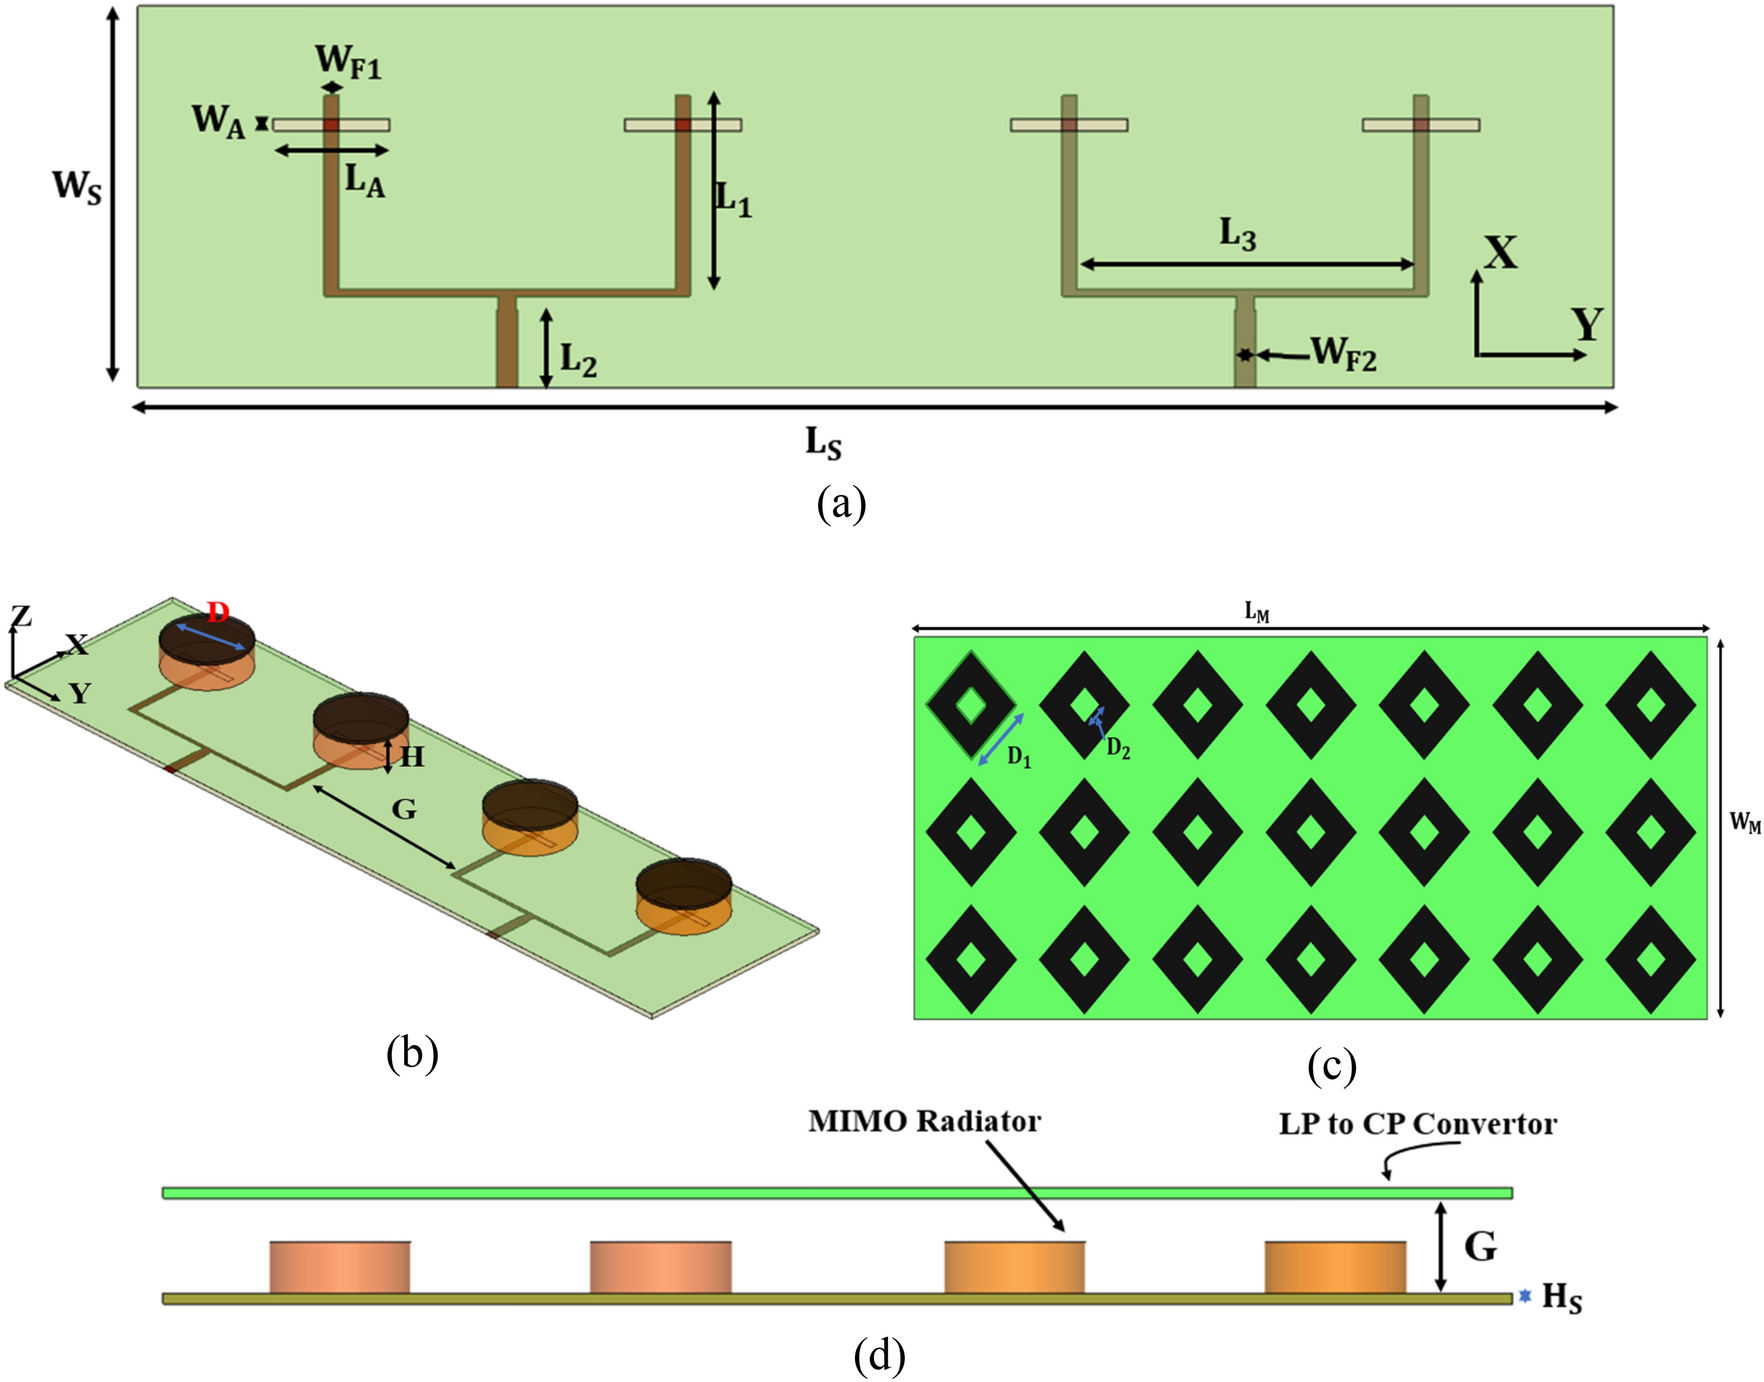 Design and analysis of frequency agile LP to CP convertor loaded silicon–graphene based MIMO array antenna in THz regime